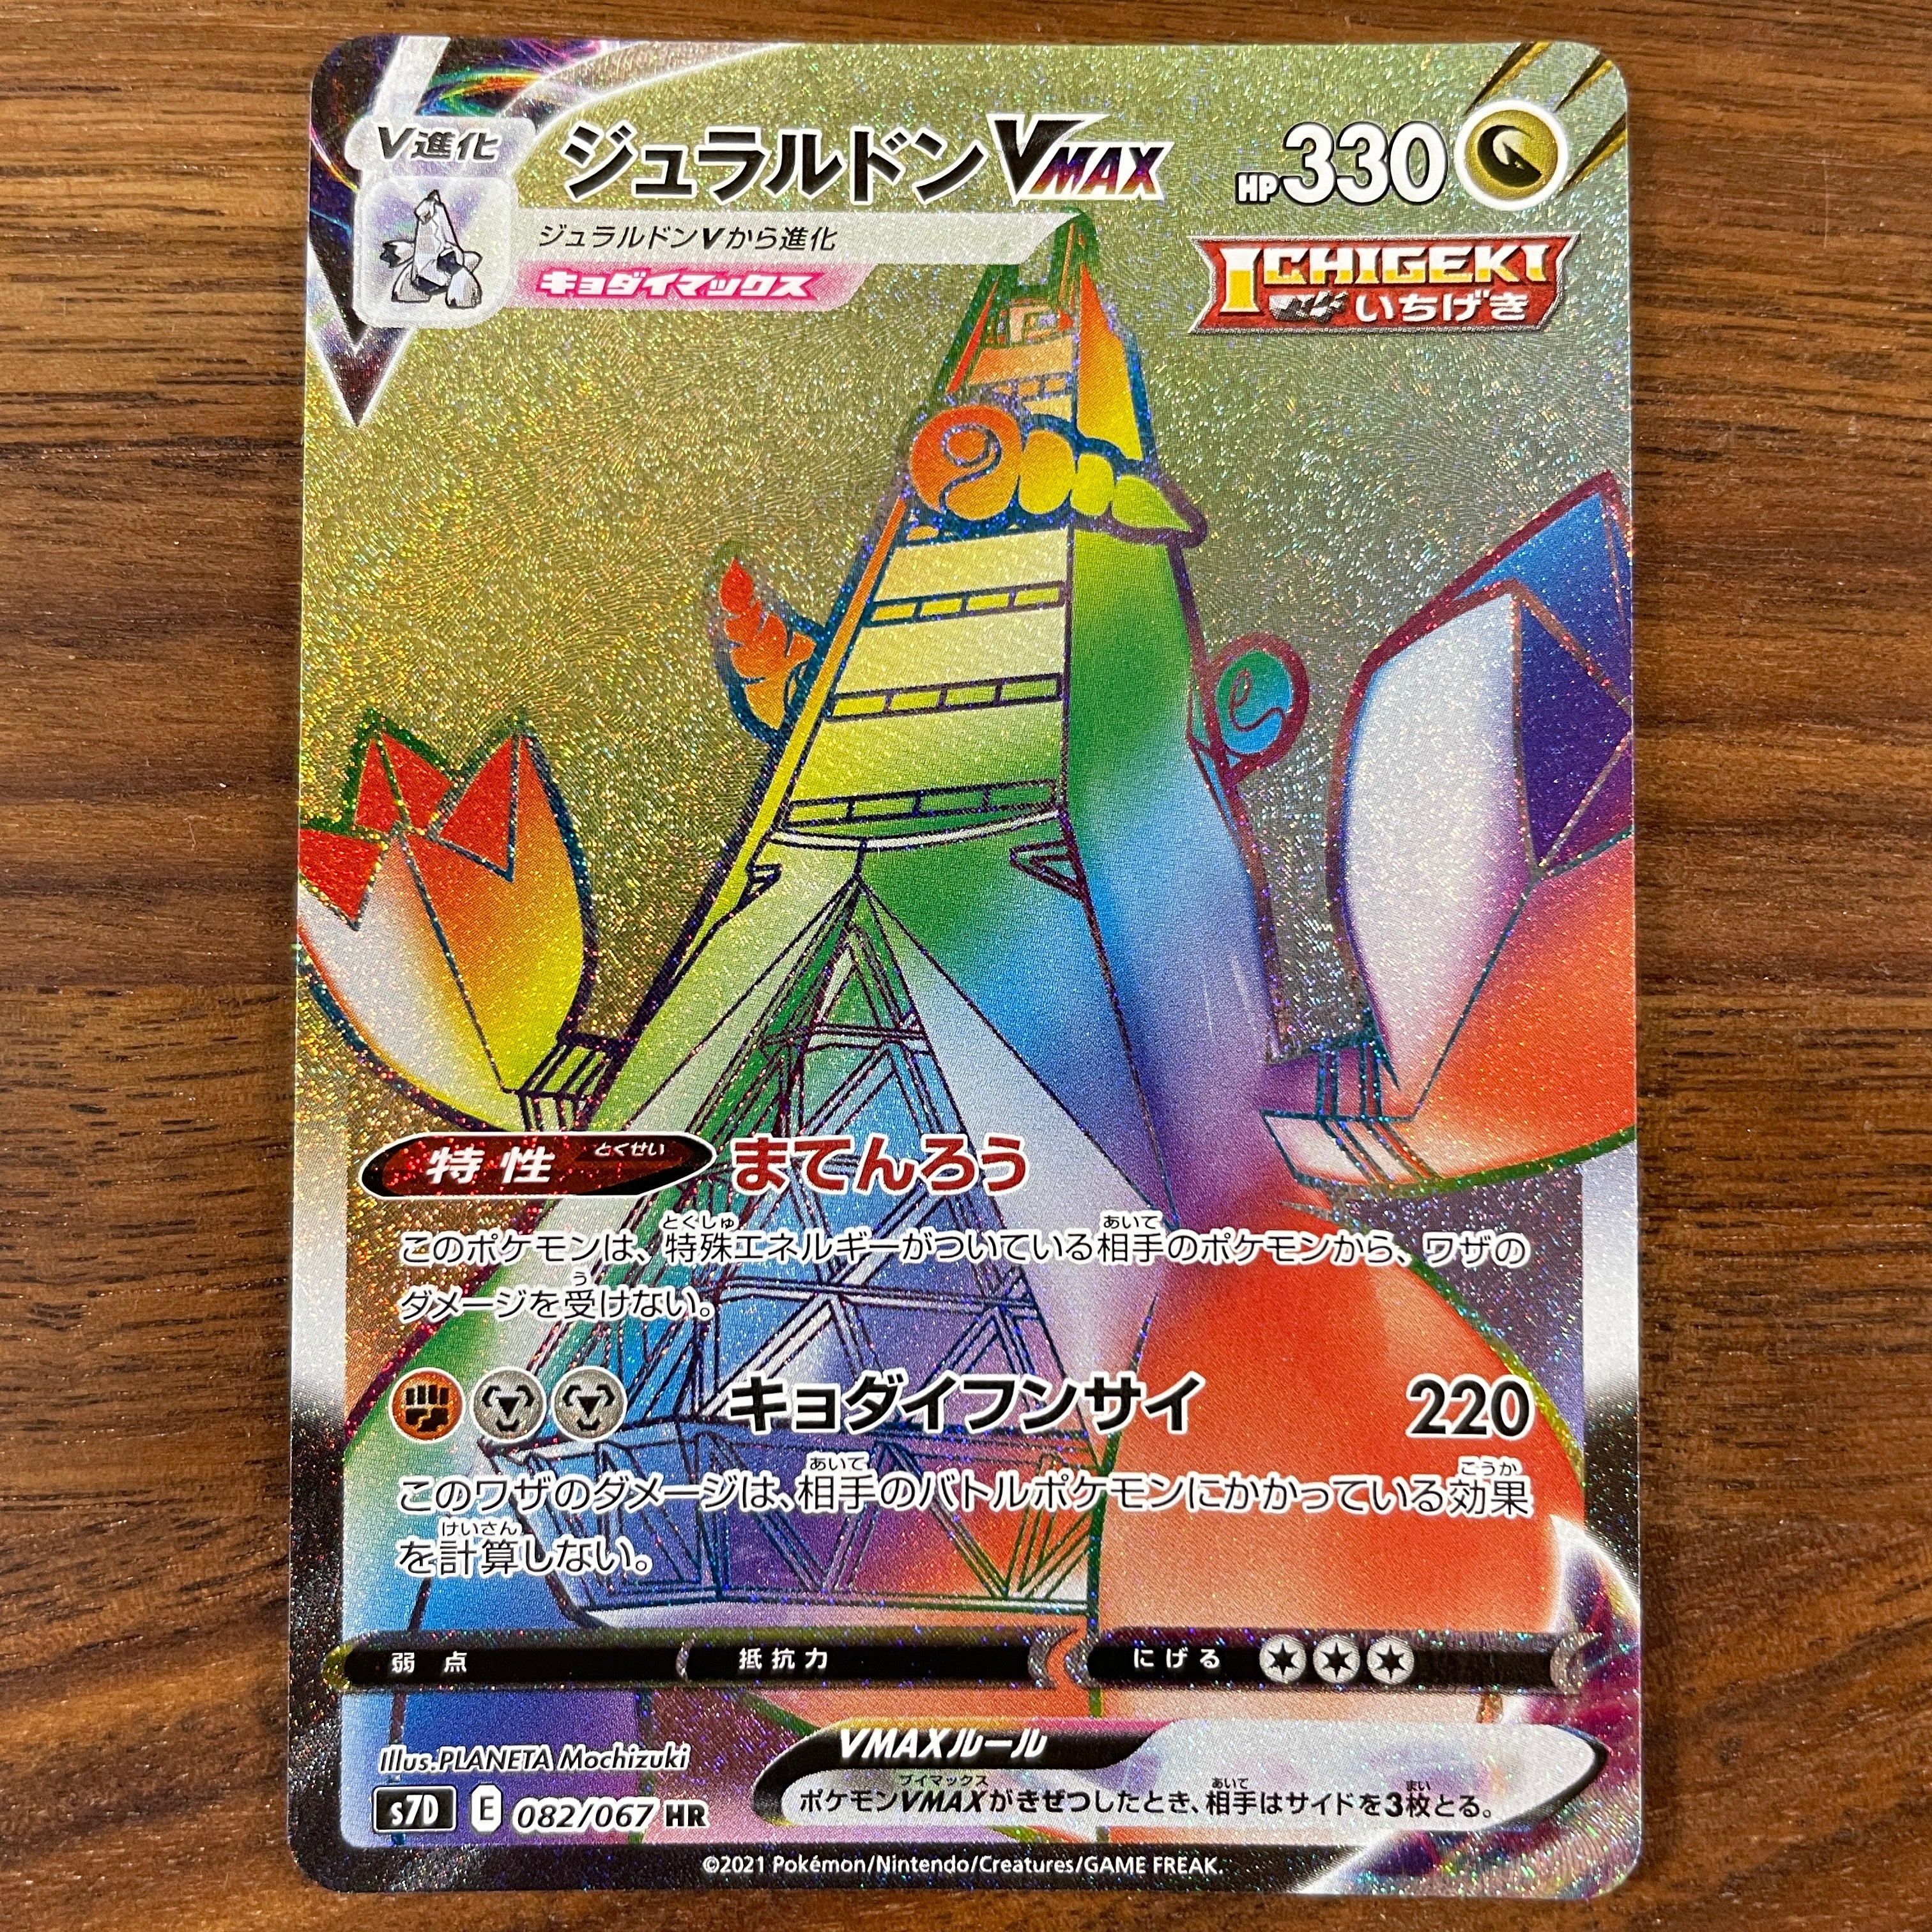 POKÉMON CARD GAME Sword & Shield Expansion pack ｢Skyscraping Perfect｣  POKÉMON CARD GAME S7D 082/069 Hyper Rare card  Duraludon VMAX